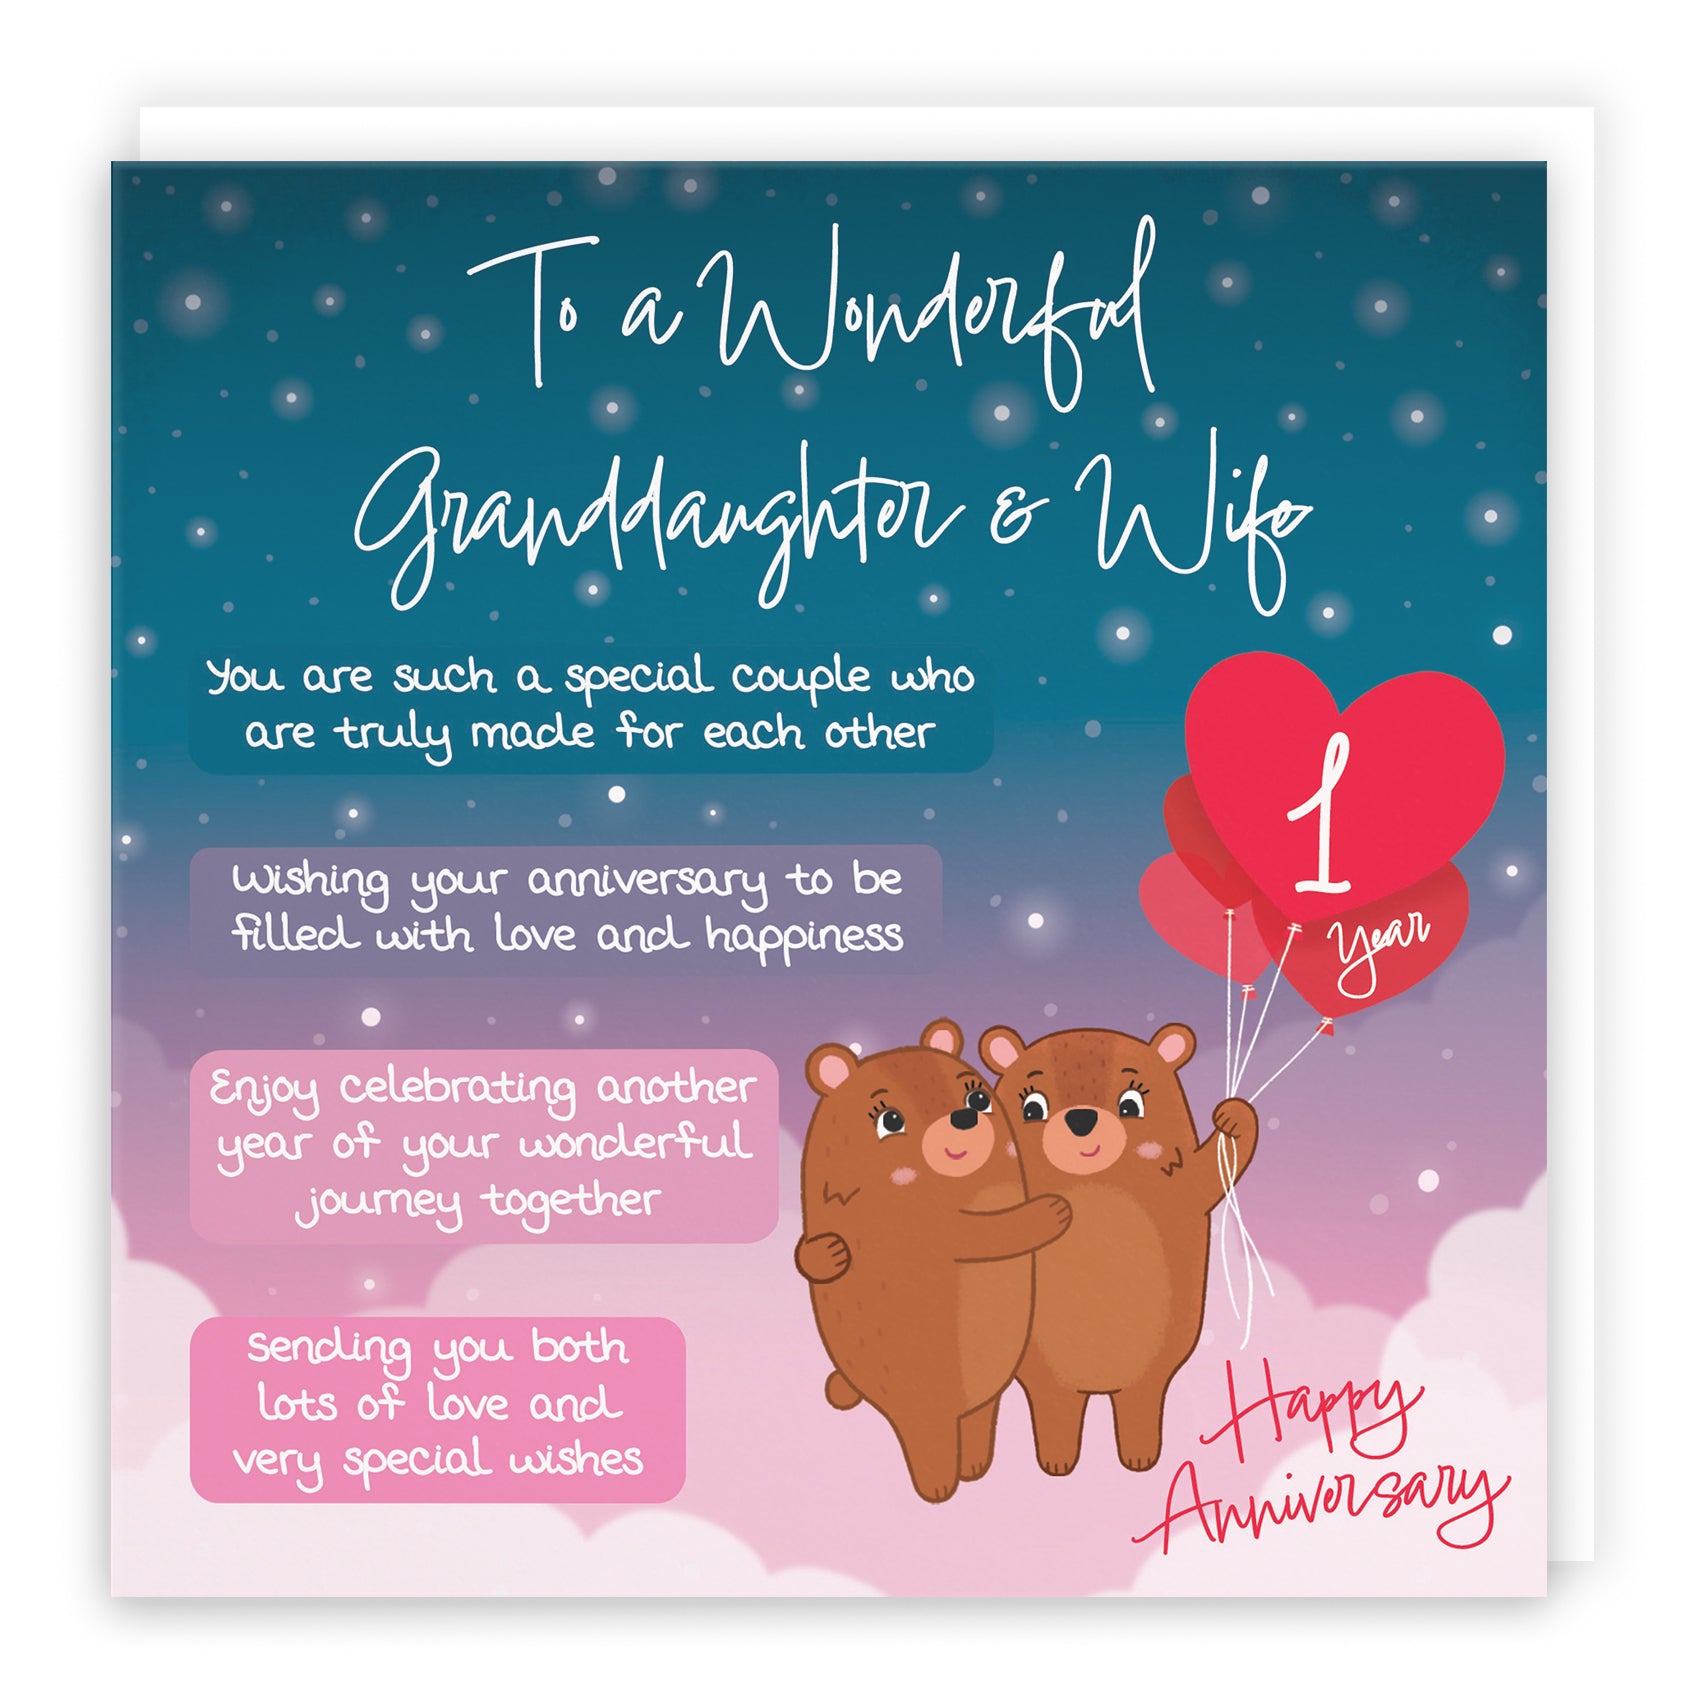 Granddaughter And Wife 1st Anniversary Card Starry Night Cute Bears